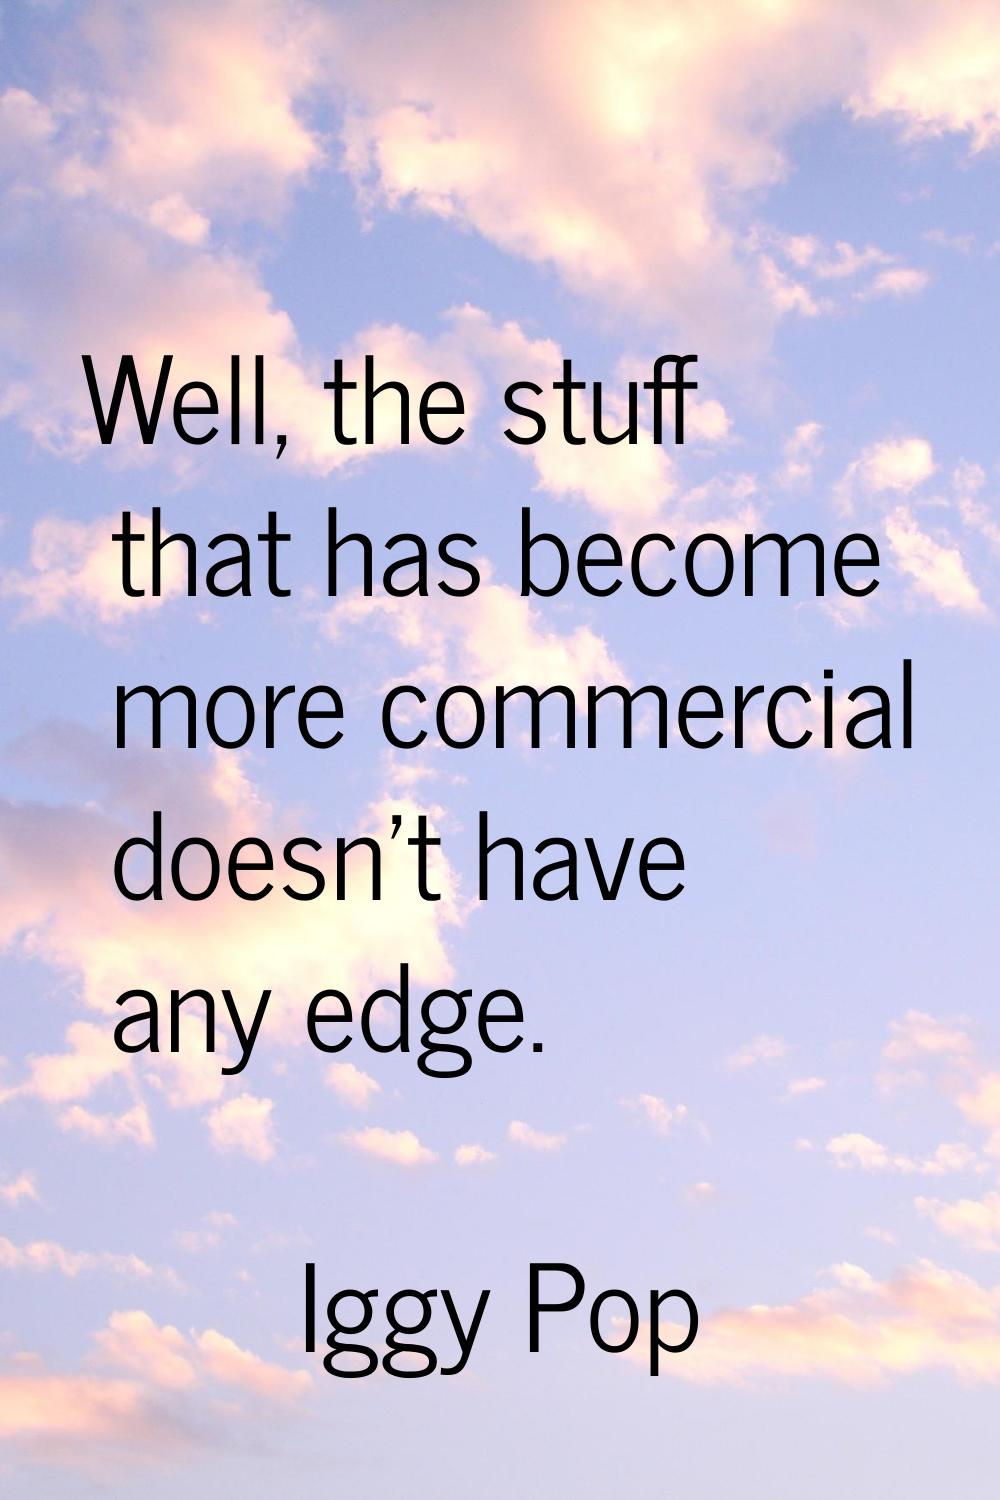 Well, the stuff that has become more commercial doesn't have any edge.